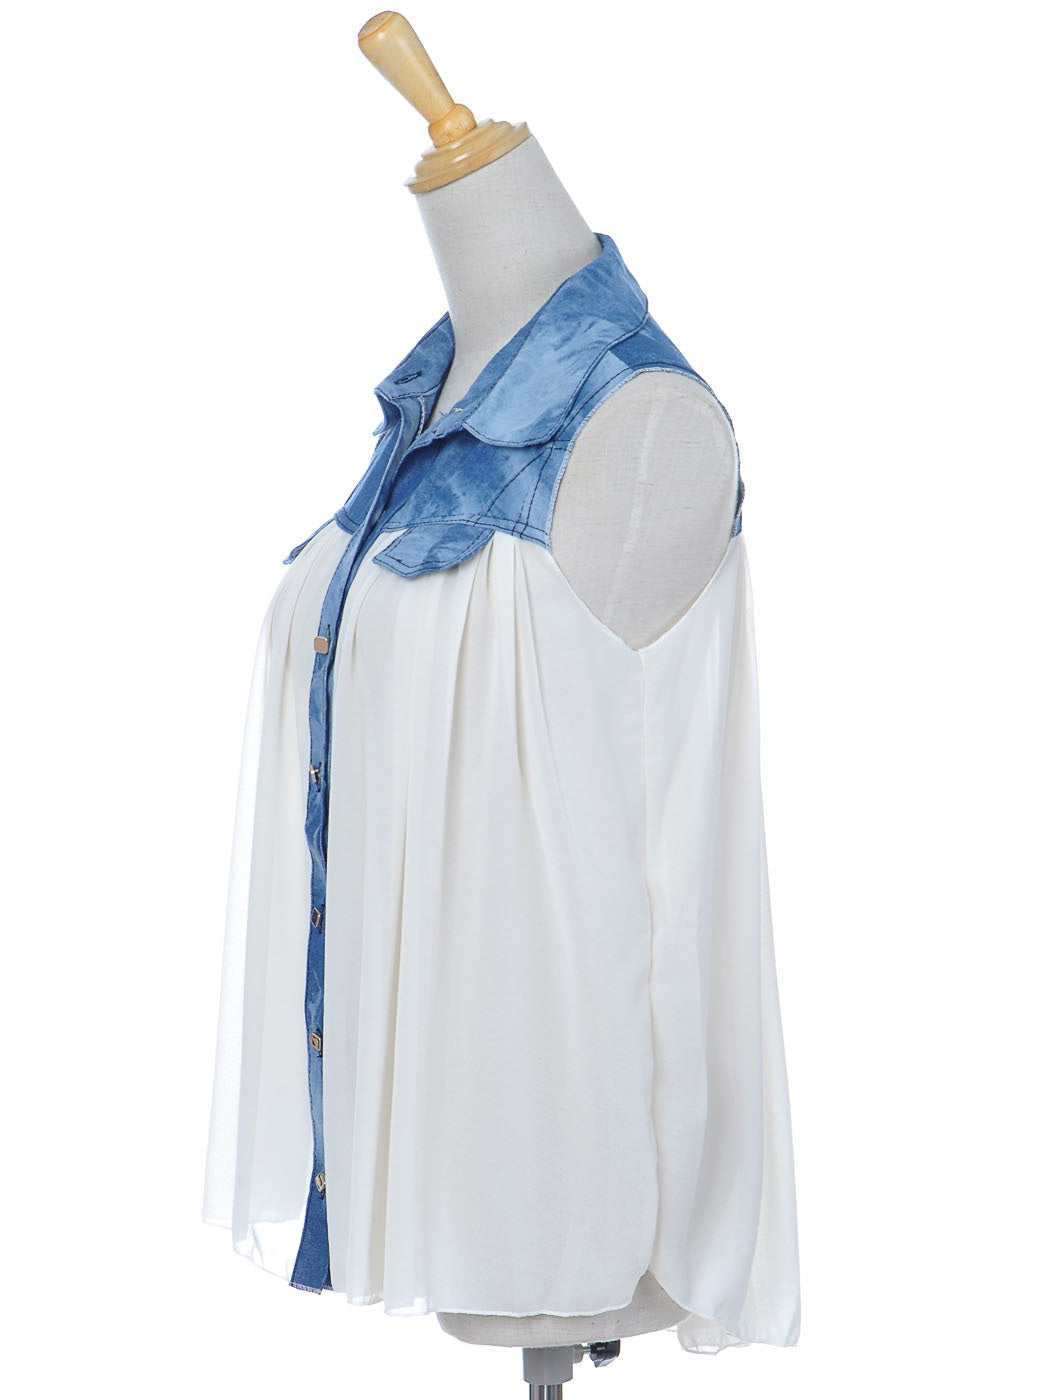 Off-White Sheer Collared Button-Down Blouse Acid Wash Blue